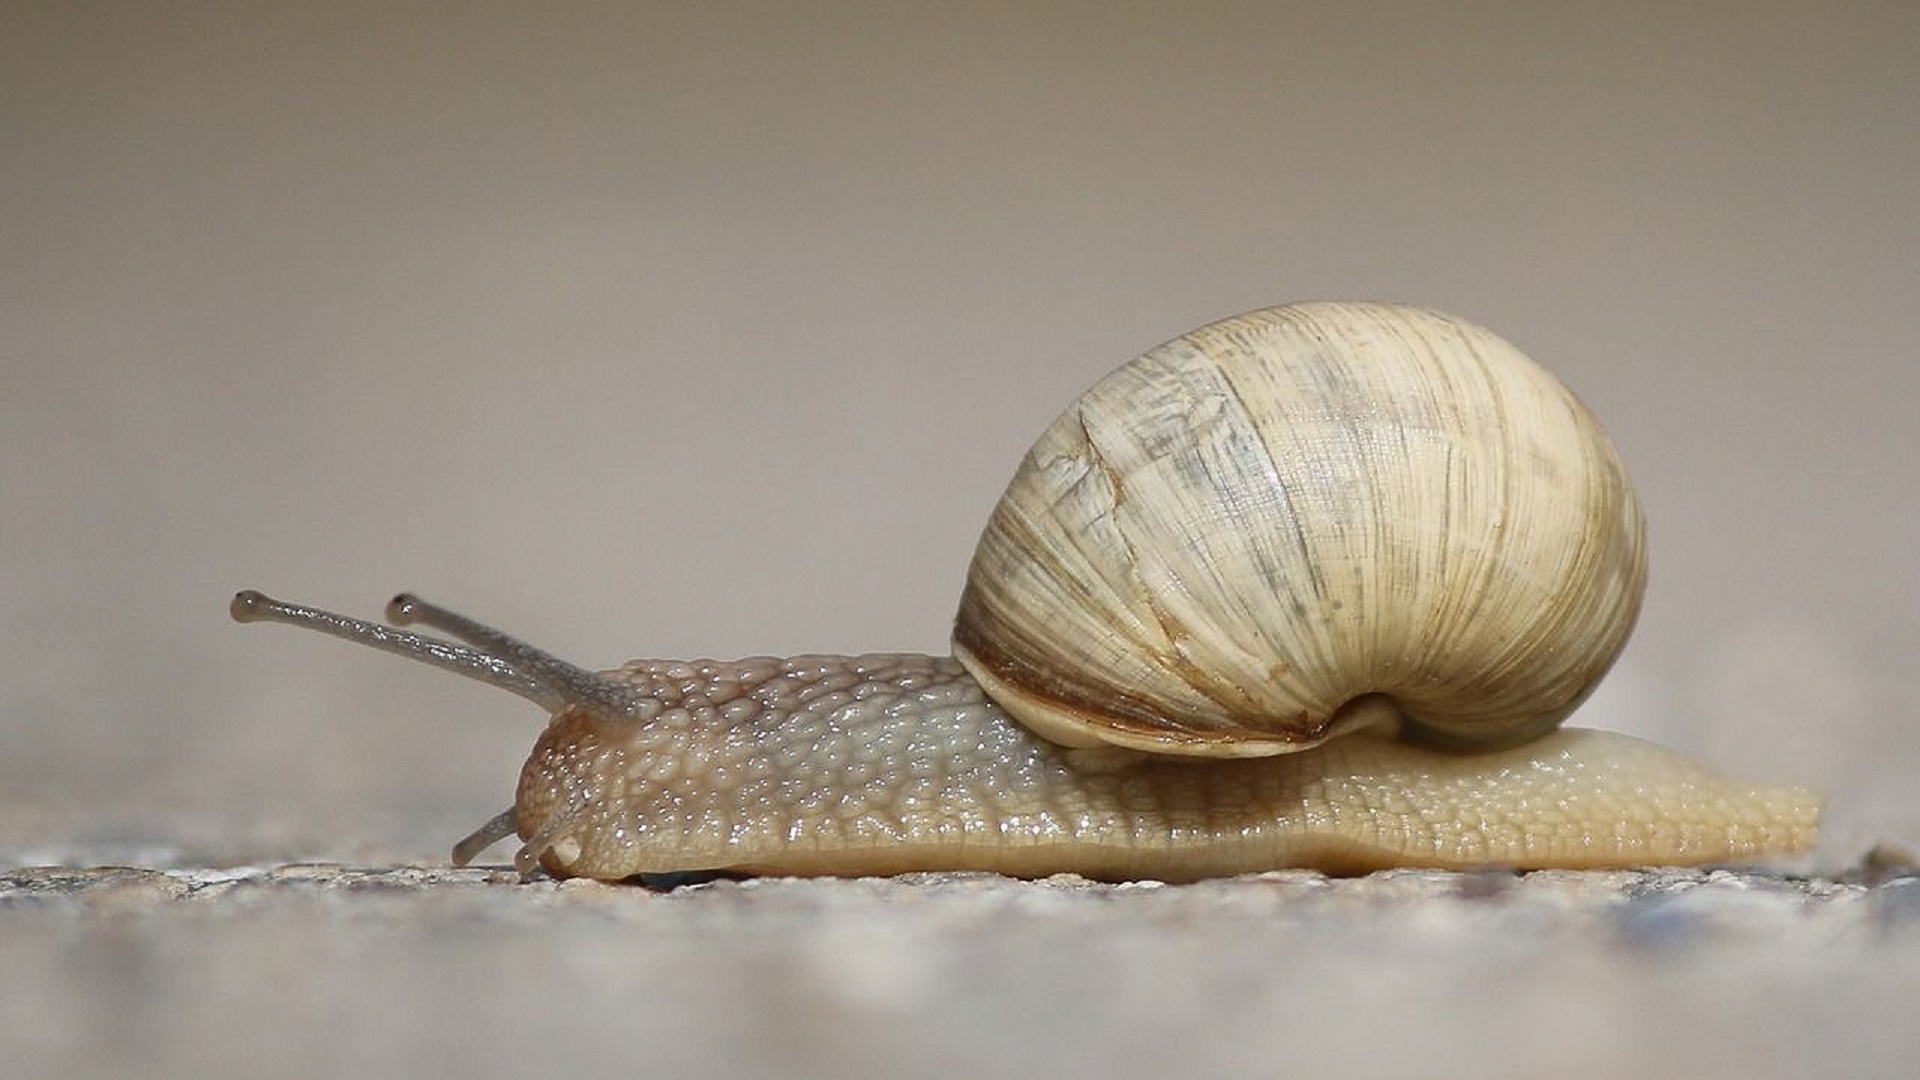 Most of the snails are exported to France